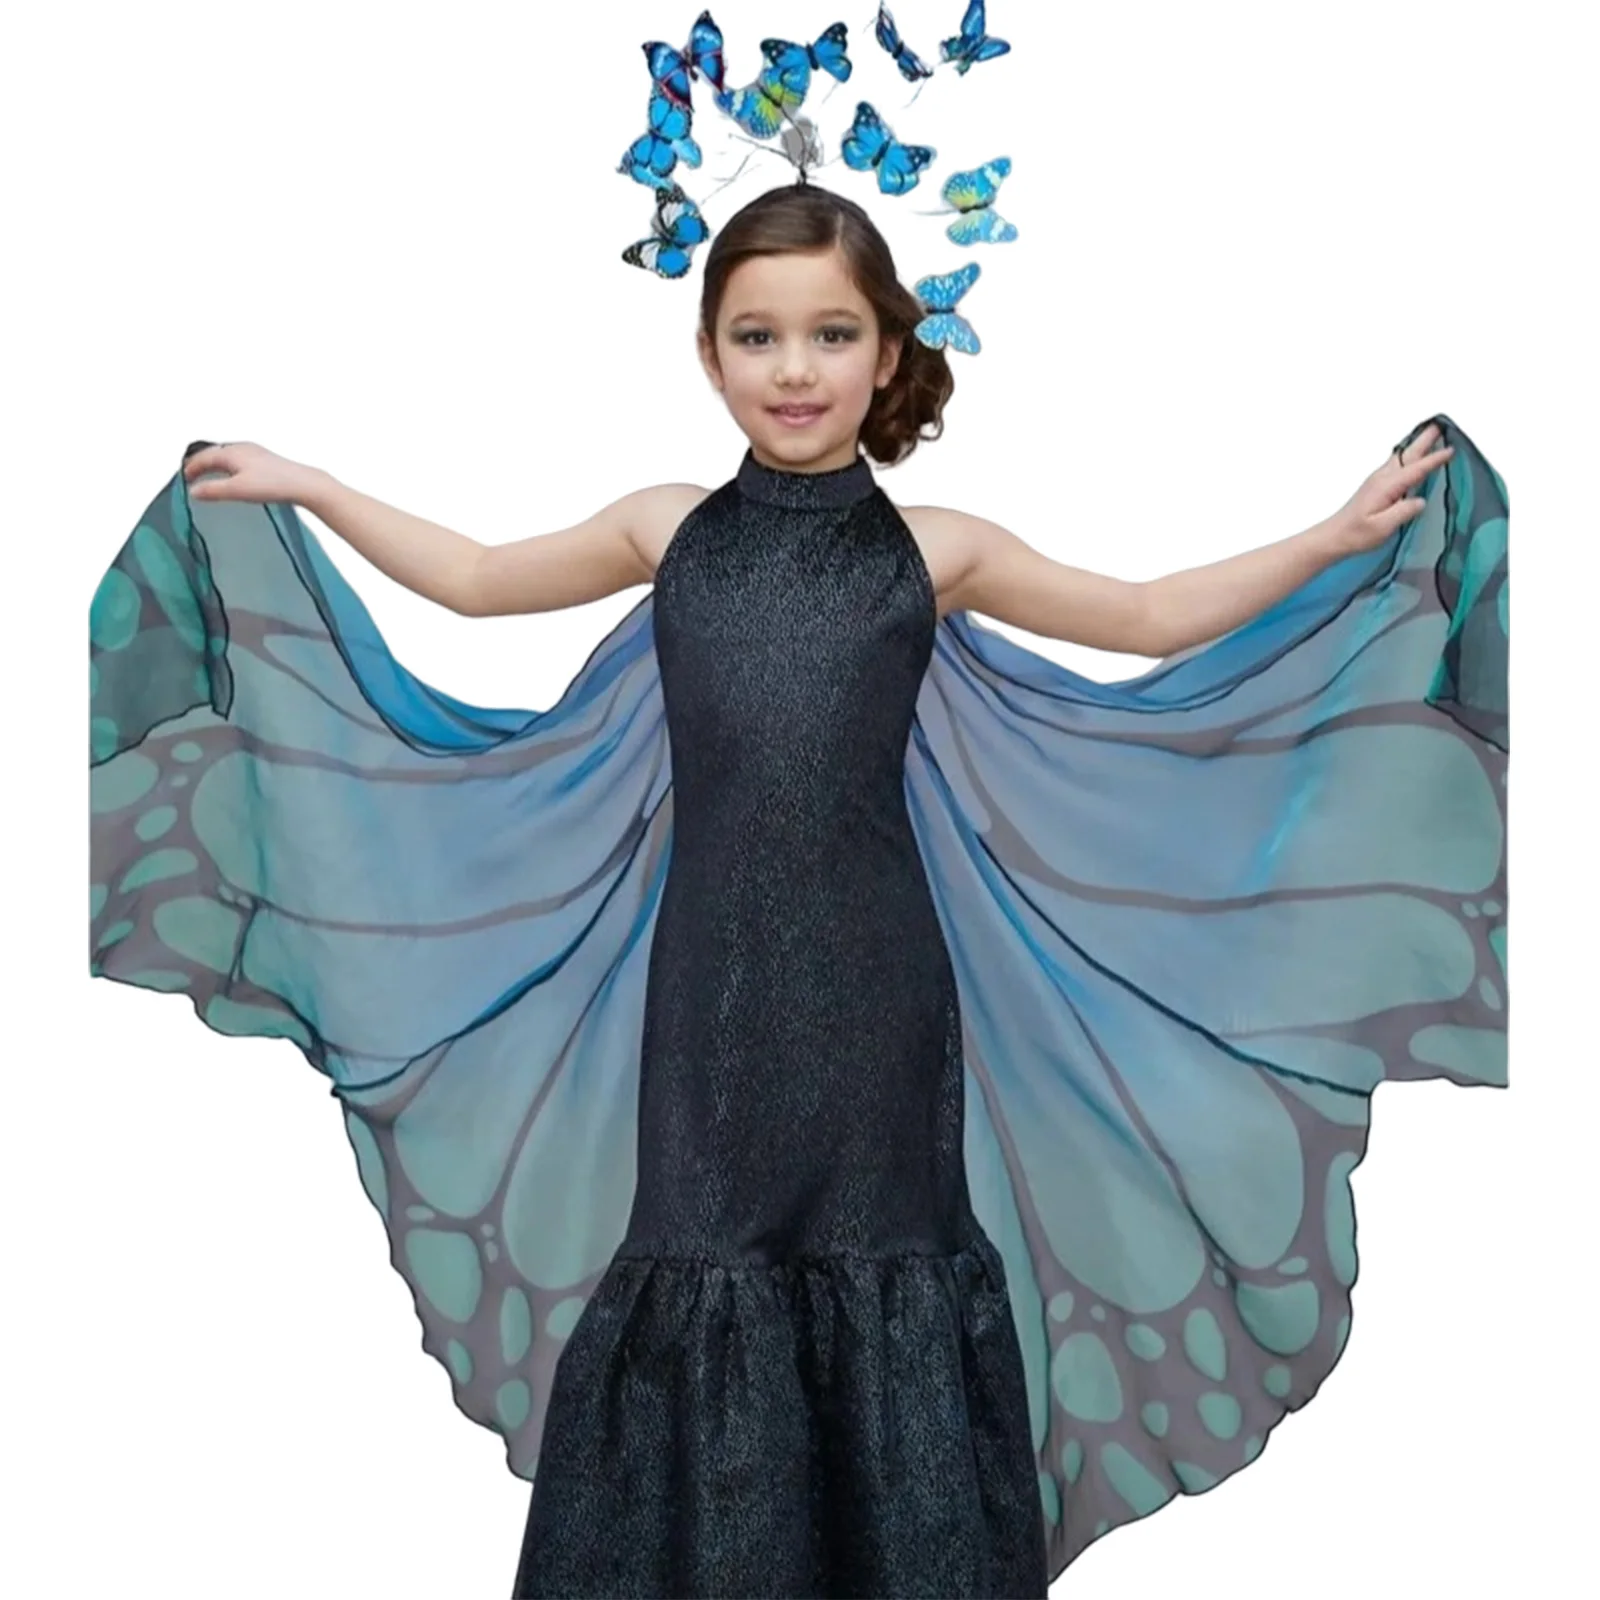 

Butterfly Wings Dance Costume Cloak For Girls Dress-Up Pixie Shawl Cloak Party Stage Story Telling Halloween Performance